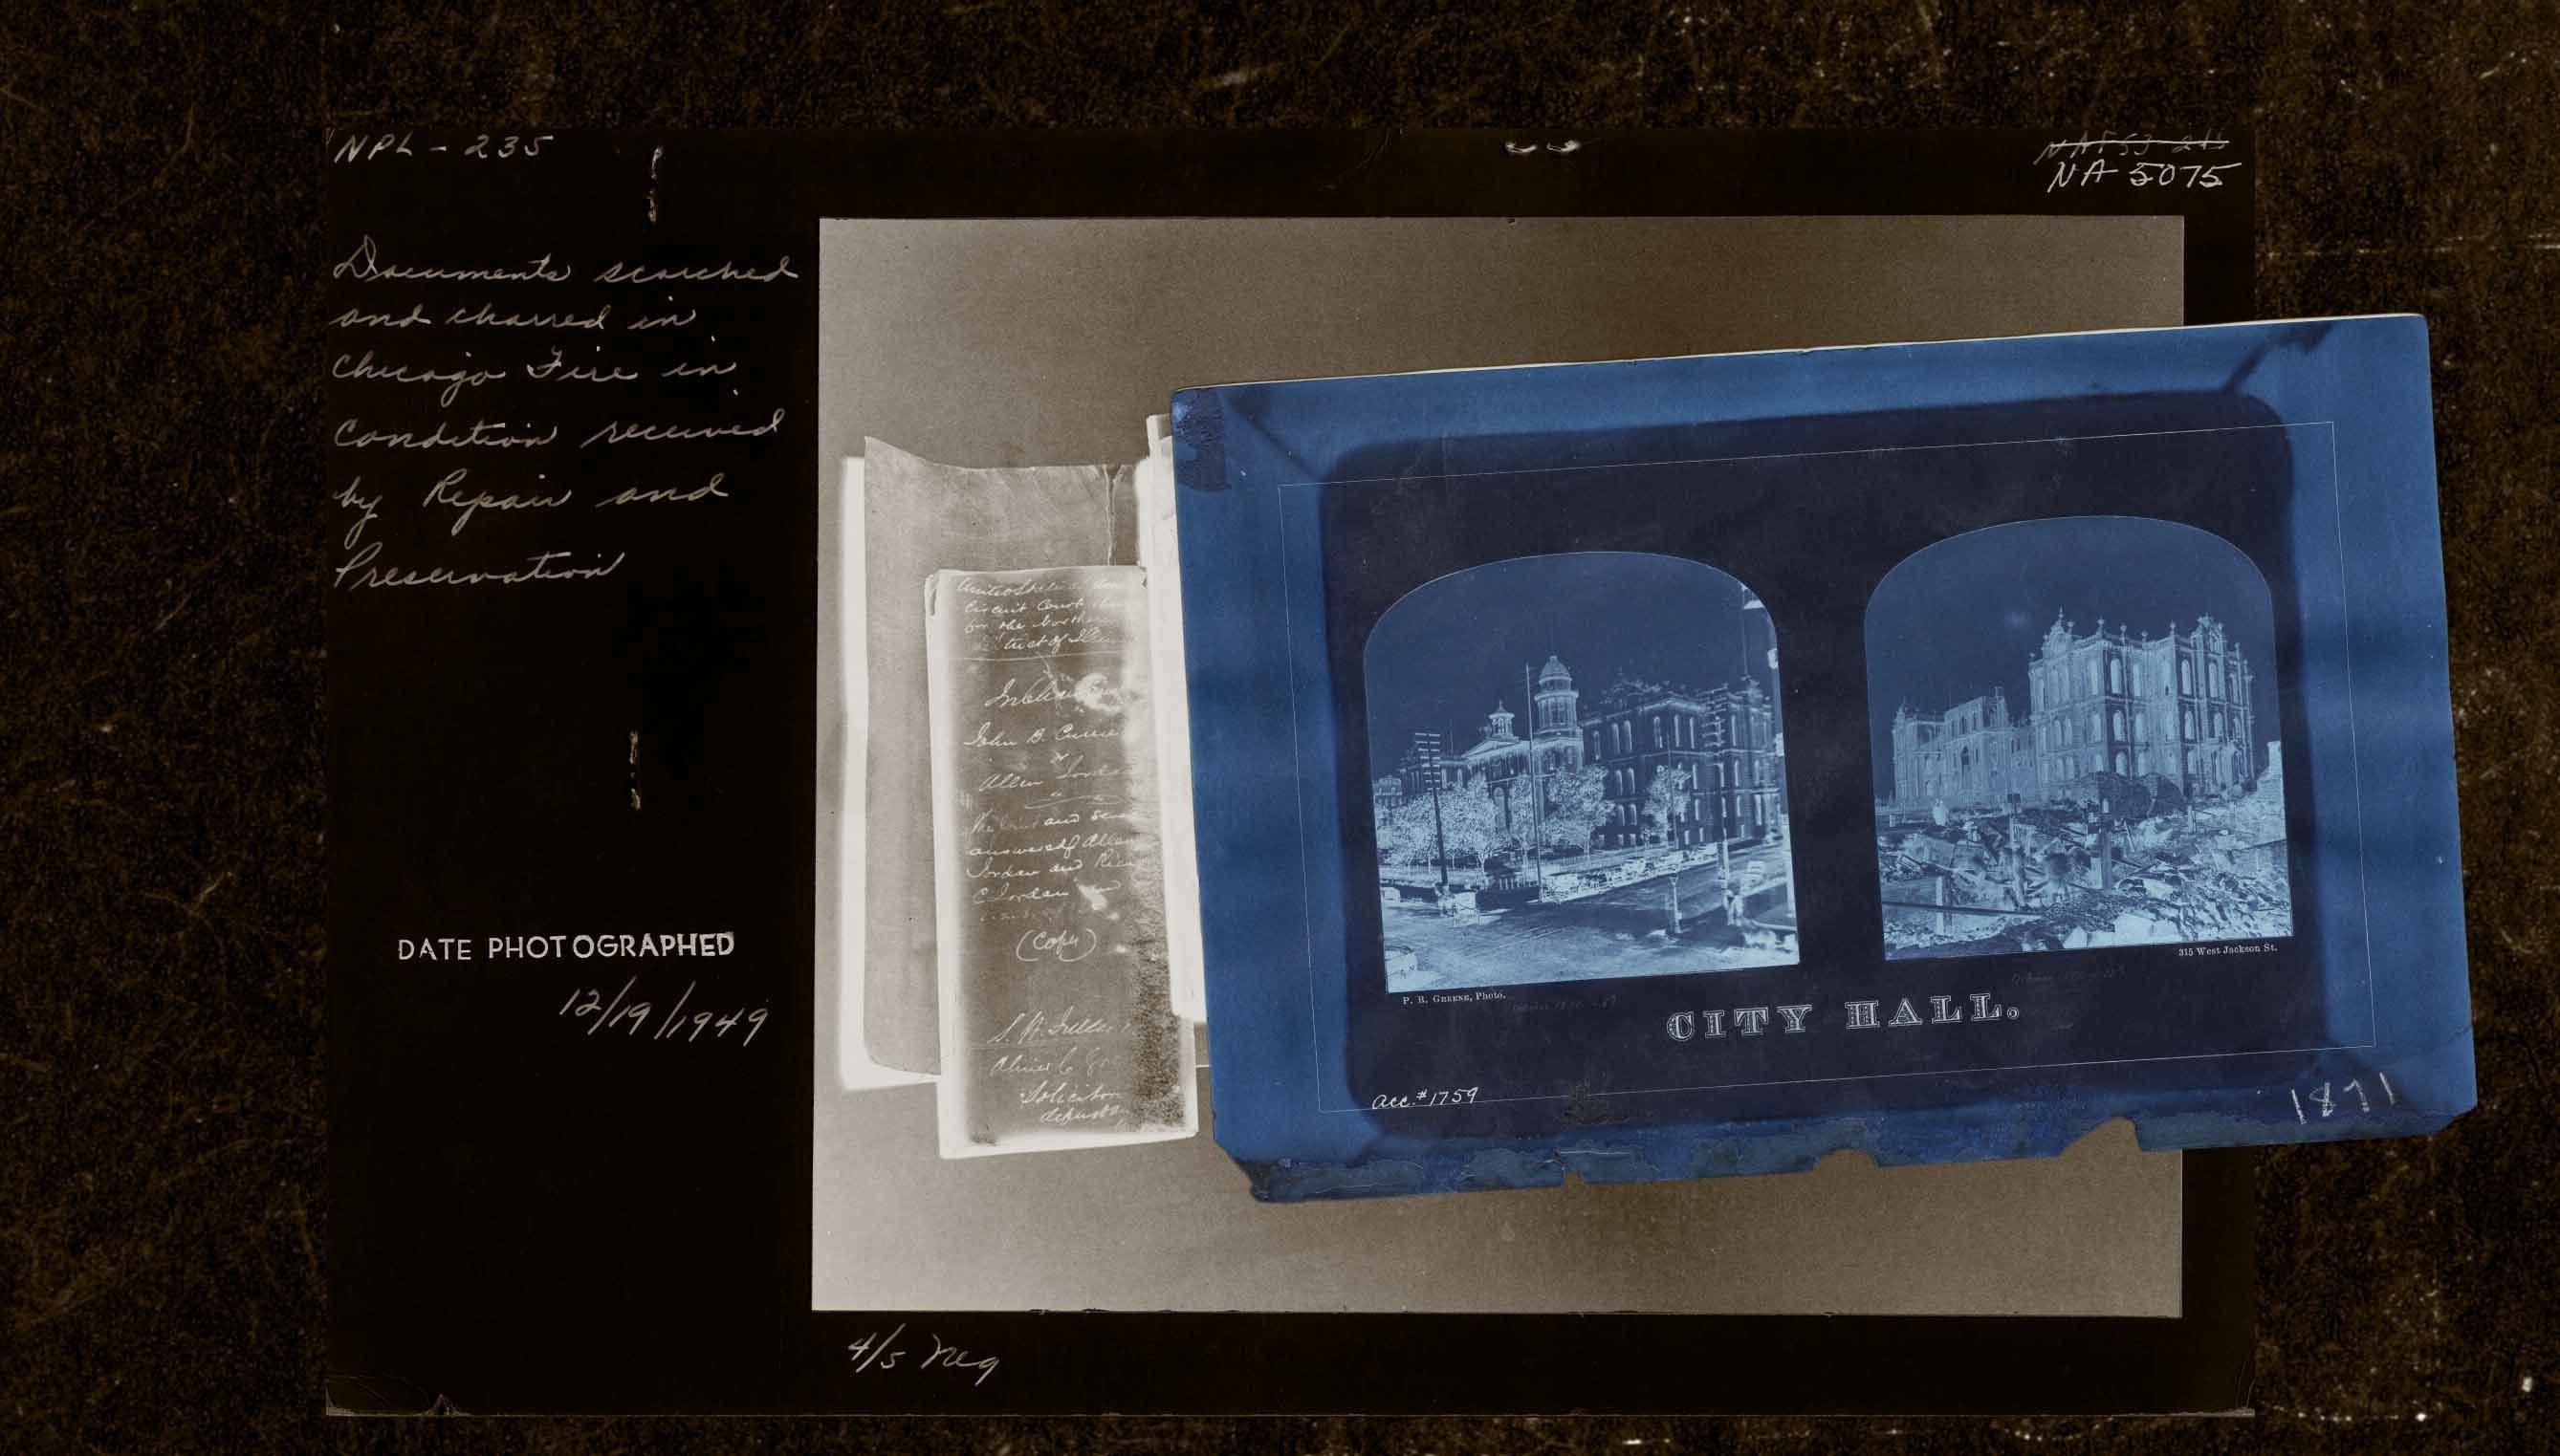 A photograph and postcard, charred in the Chicago fire. Dated 12/19/1949.